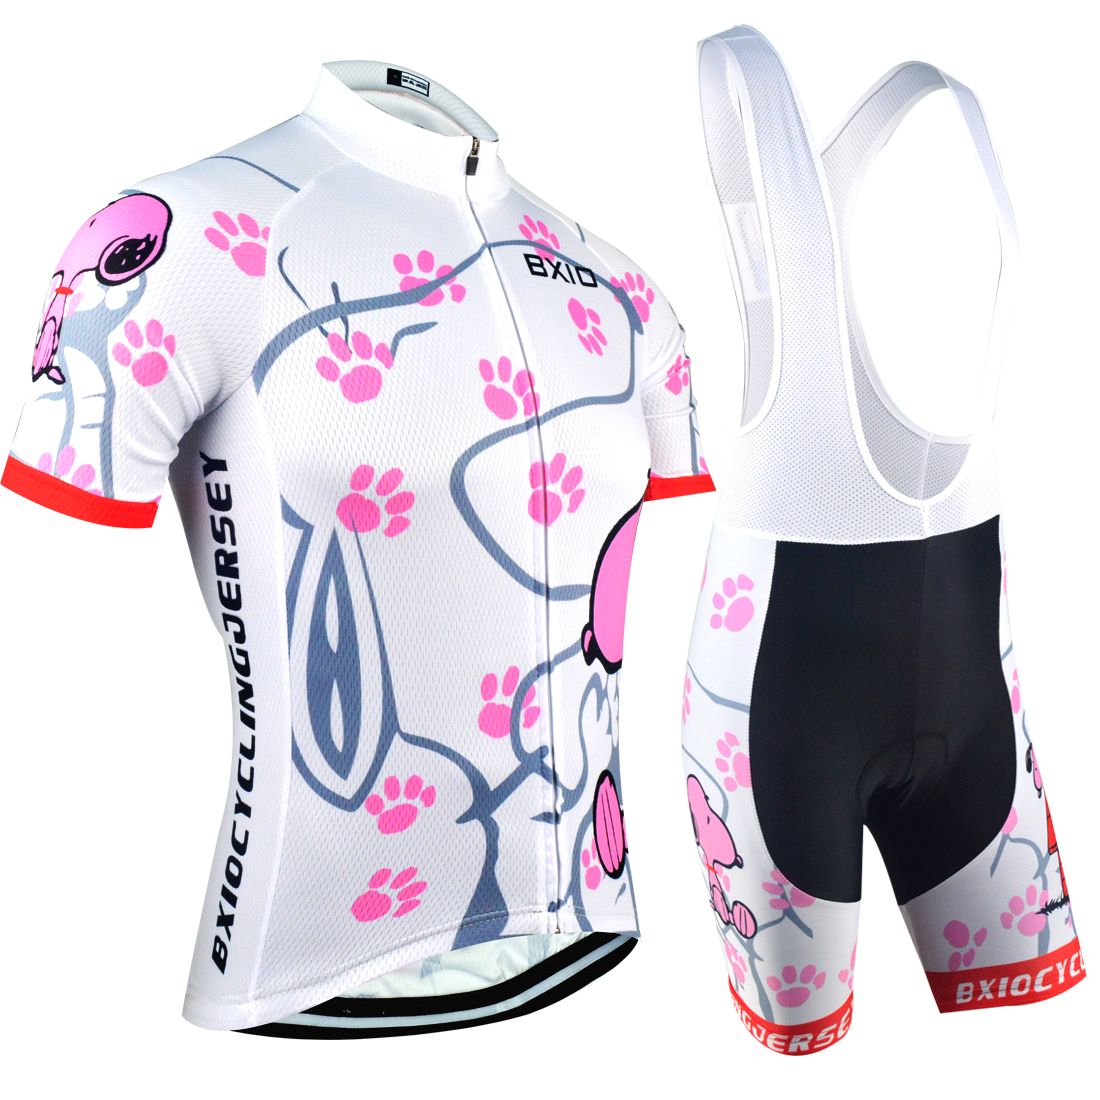 snoopy cycling jersey